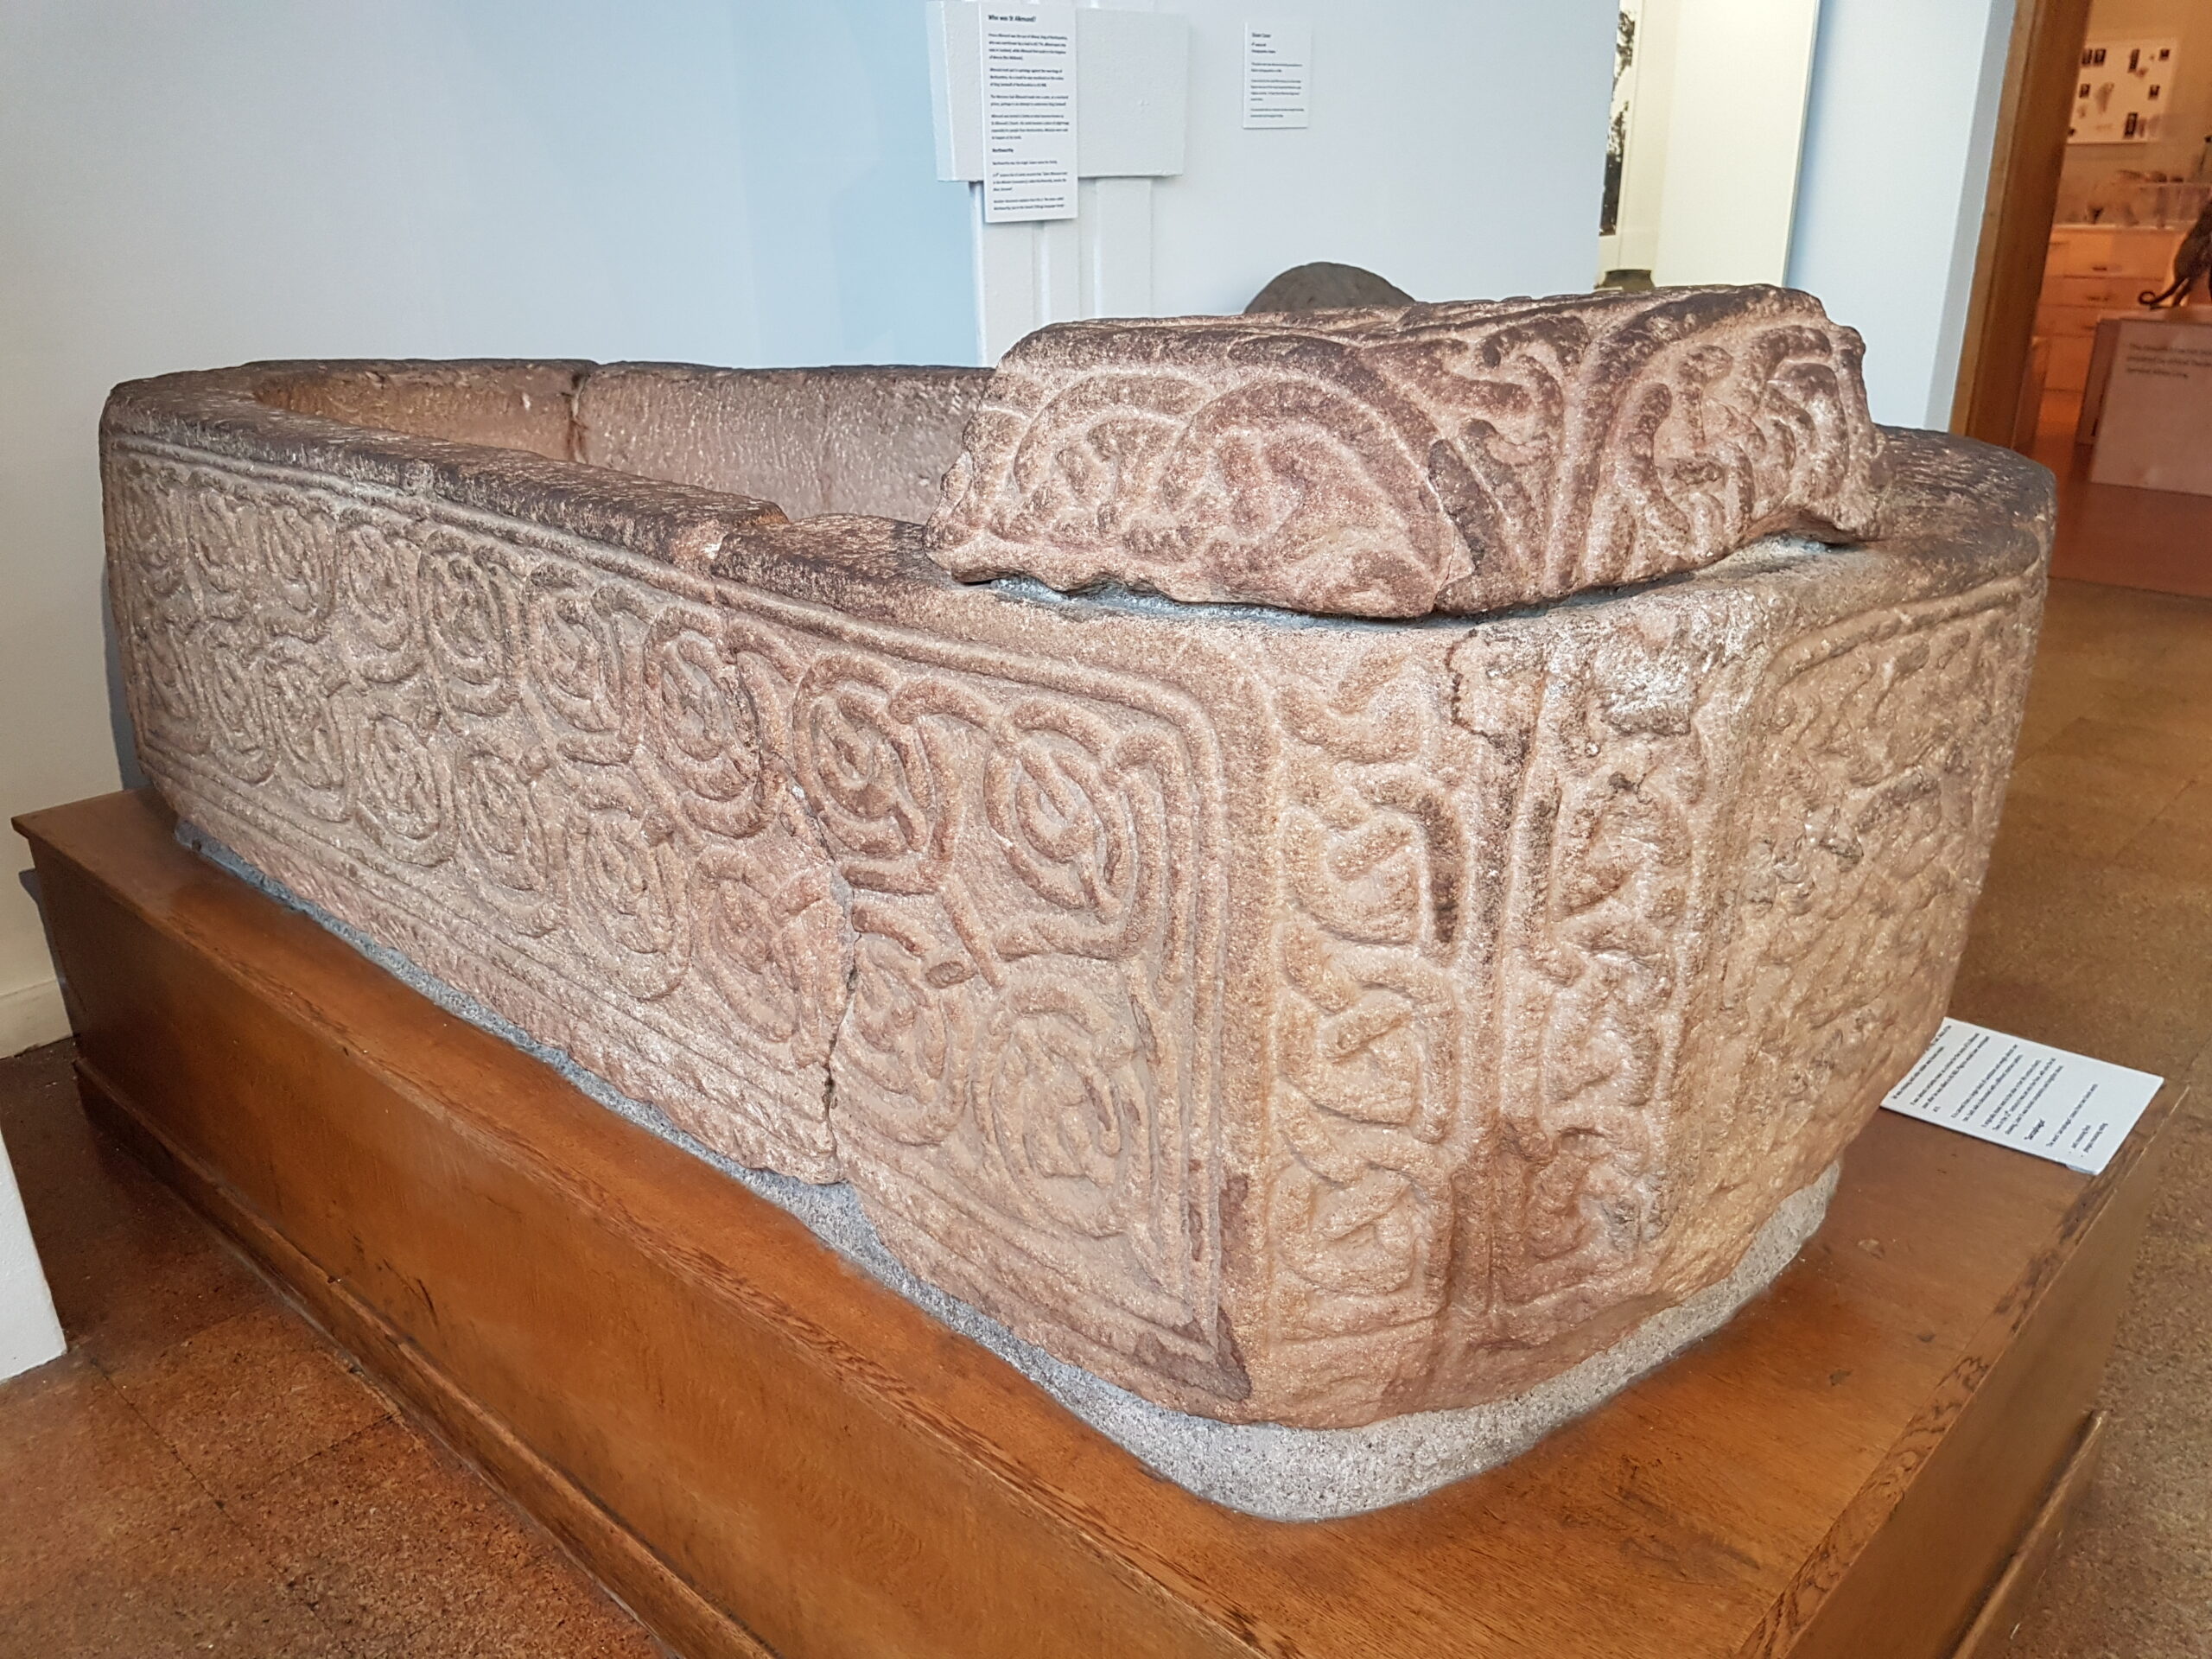 Sarcophagus of St. Alkmund, at the Derby Museum and Art Gallery, Derby, UK